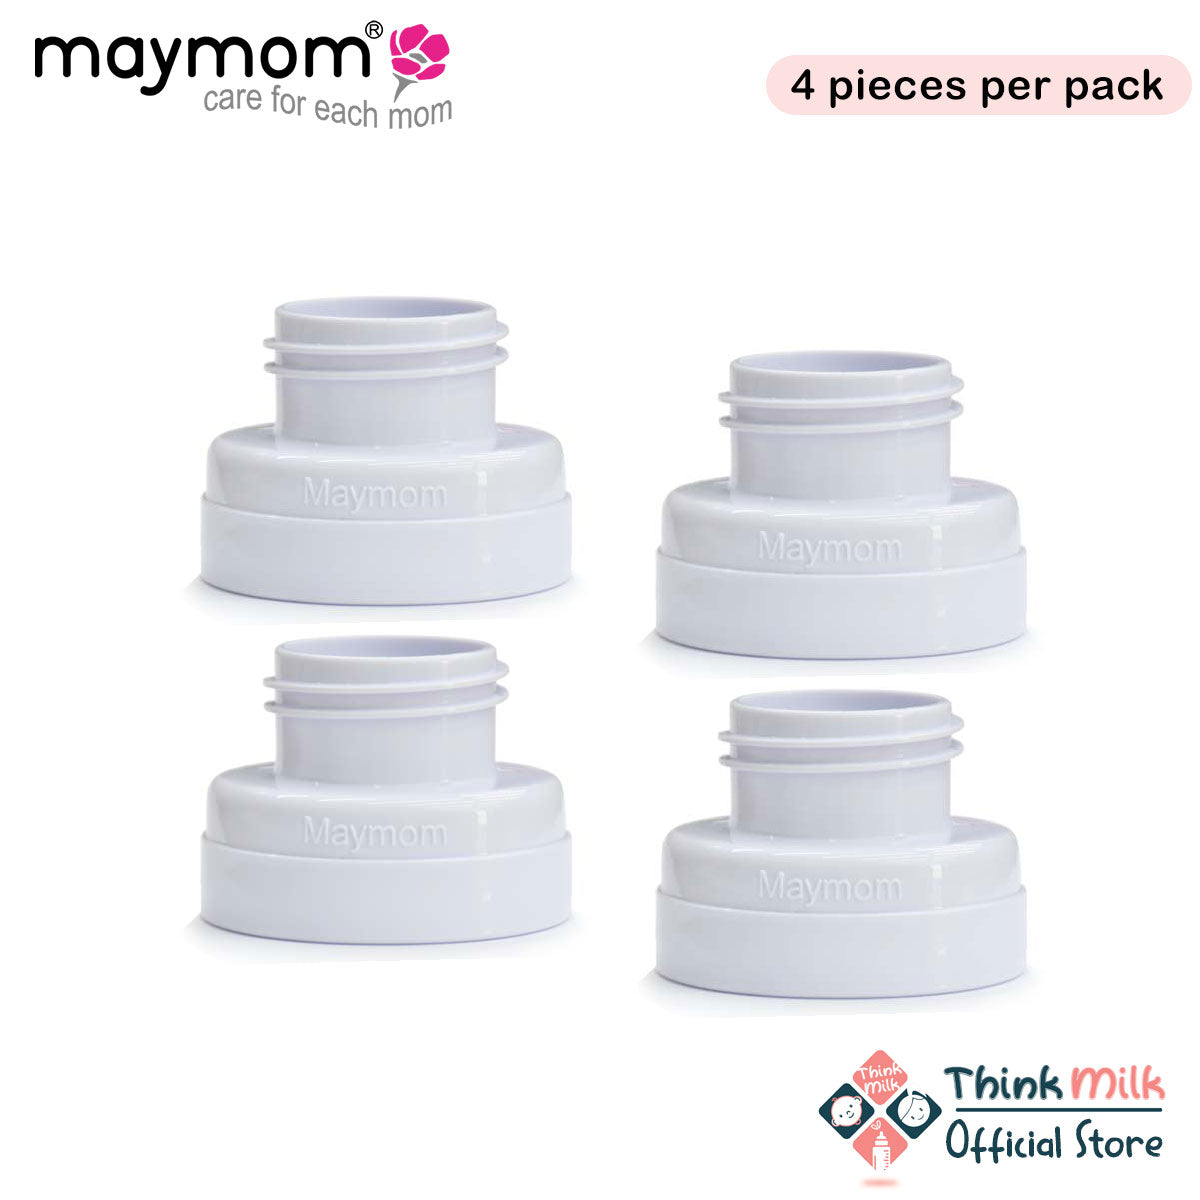 Maymom Bottle Thread Changer Narrow to Wide